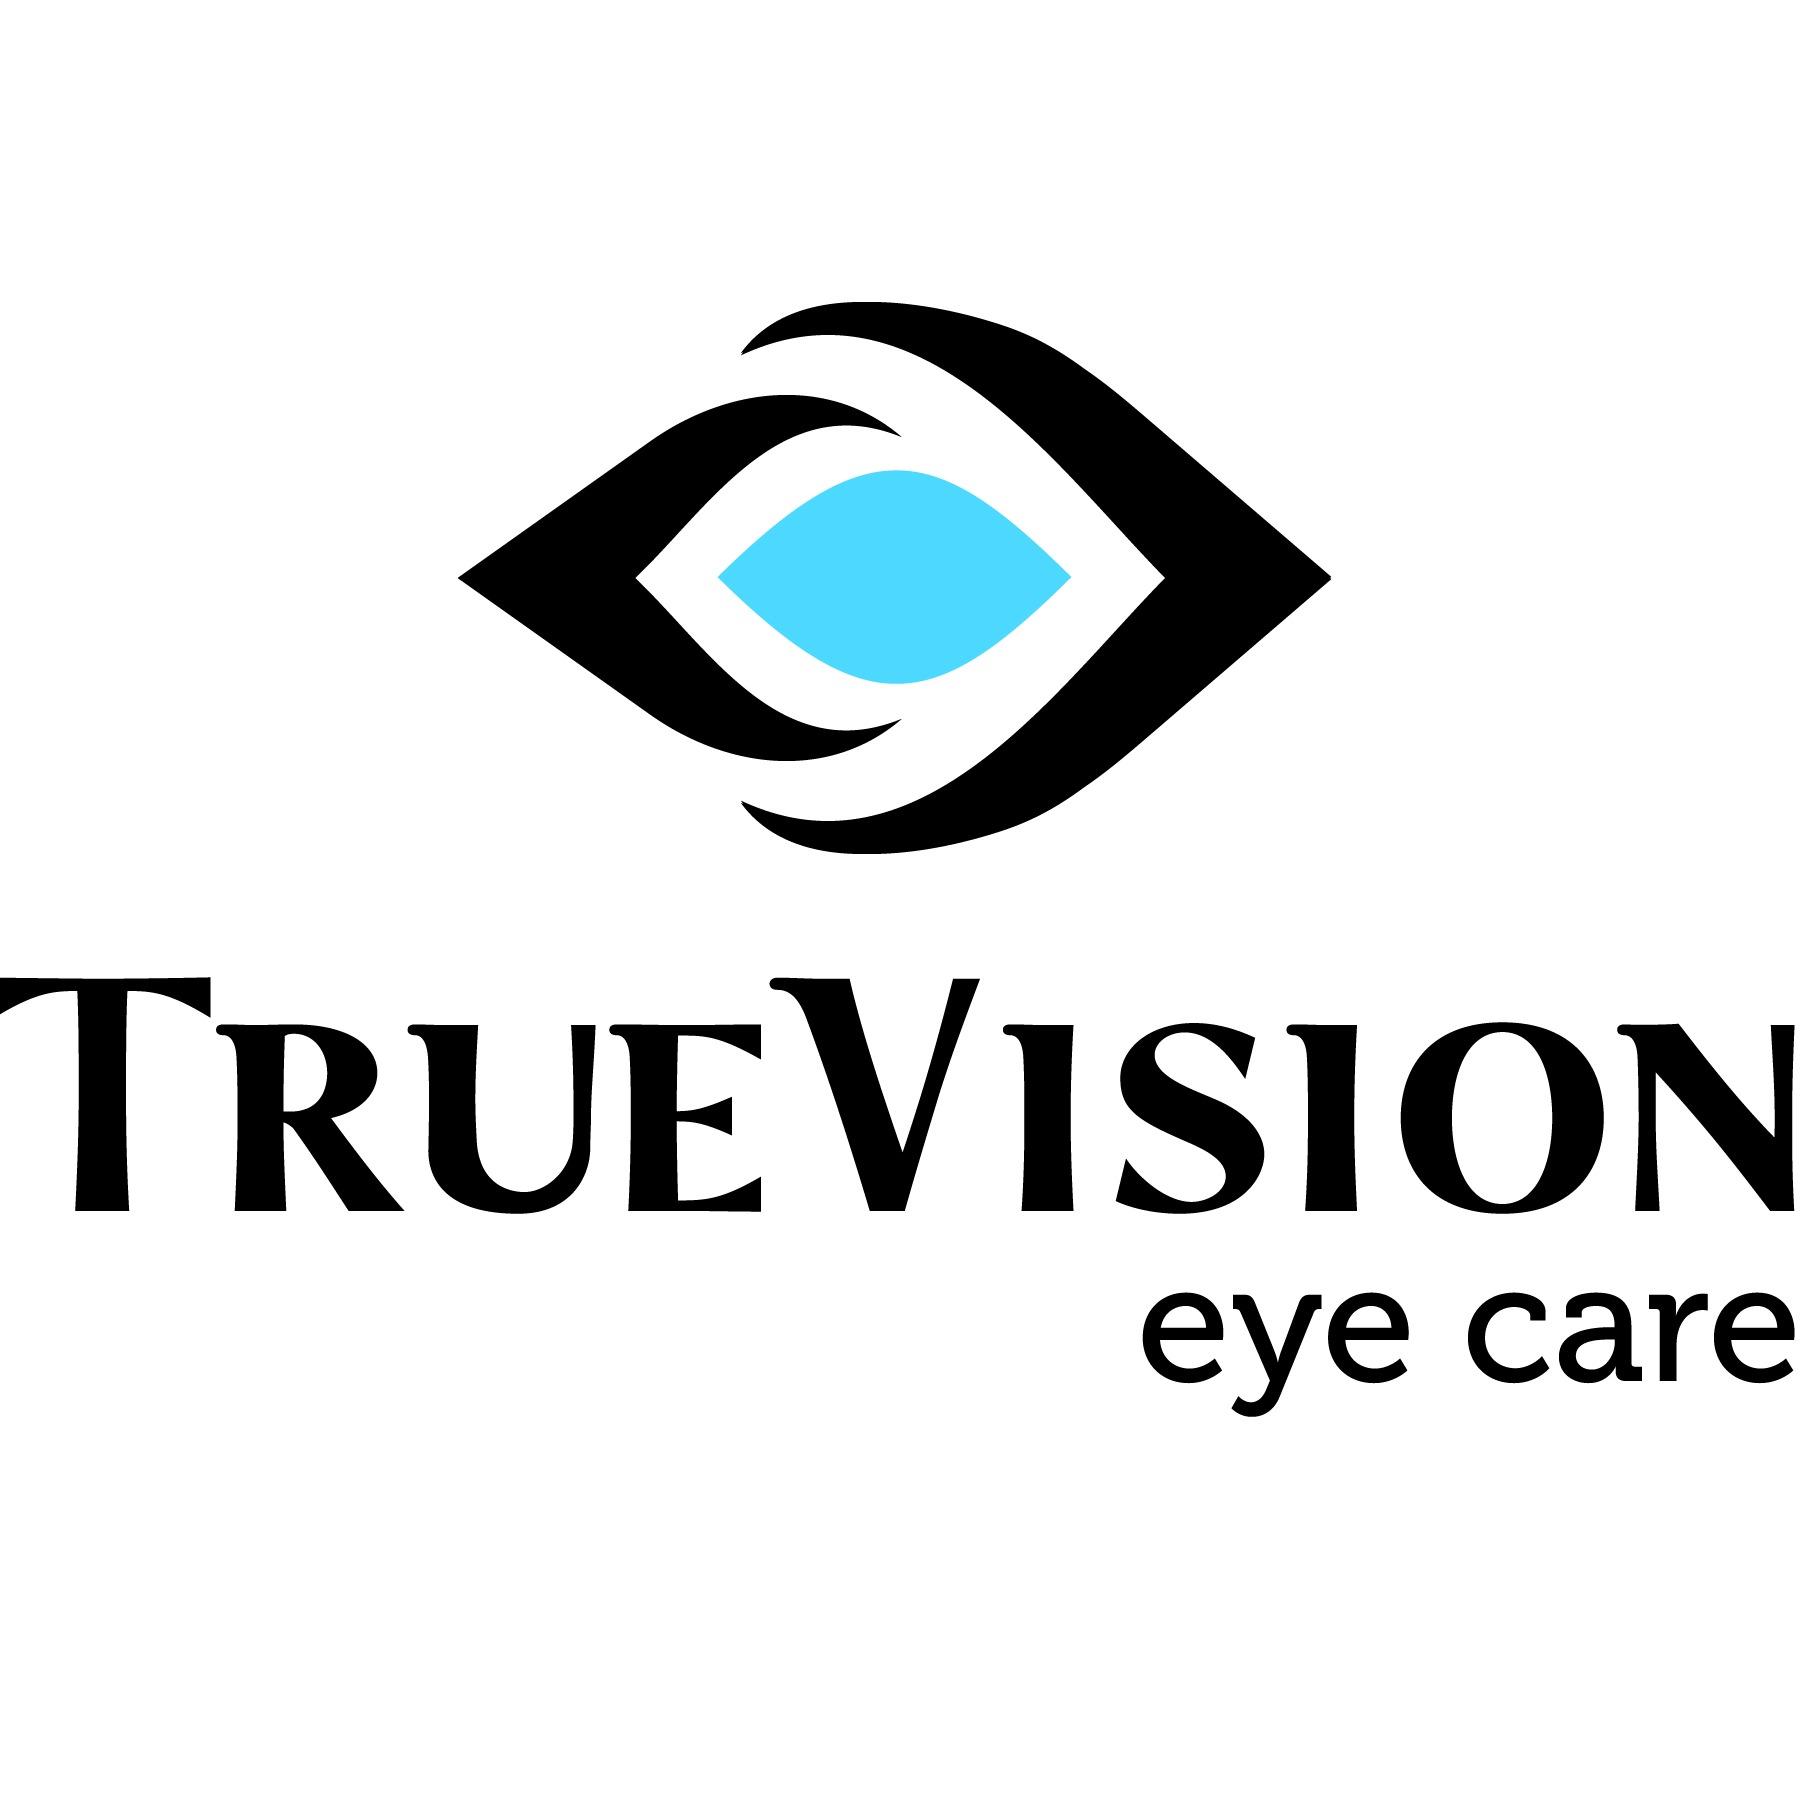 TrueVision Eye Care Coupons near me in Morrisville | 8coupons